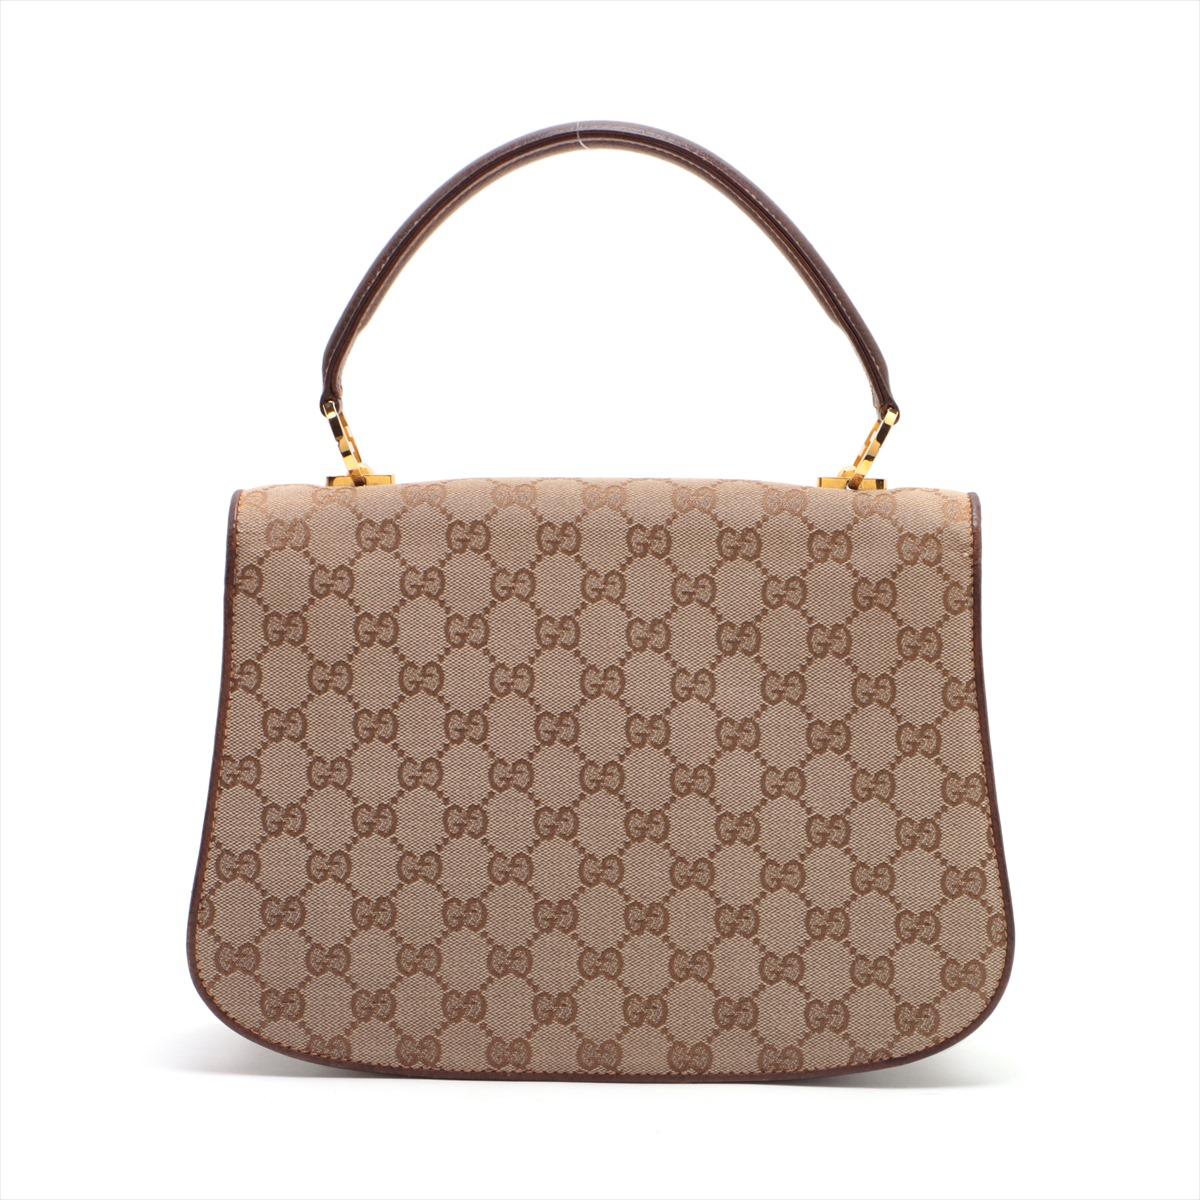 Gucci GG Canvas Top Handle Bag Beige In Good Condition For Sale In Indianapolis, IN